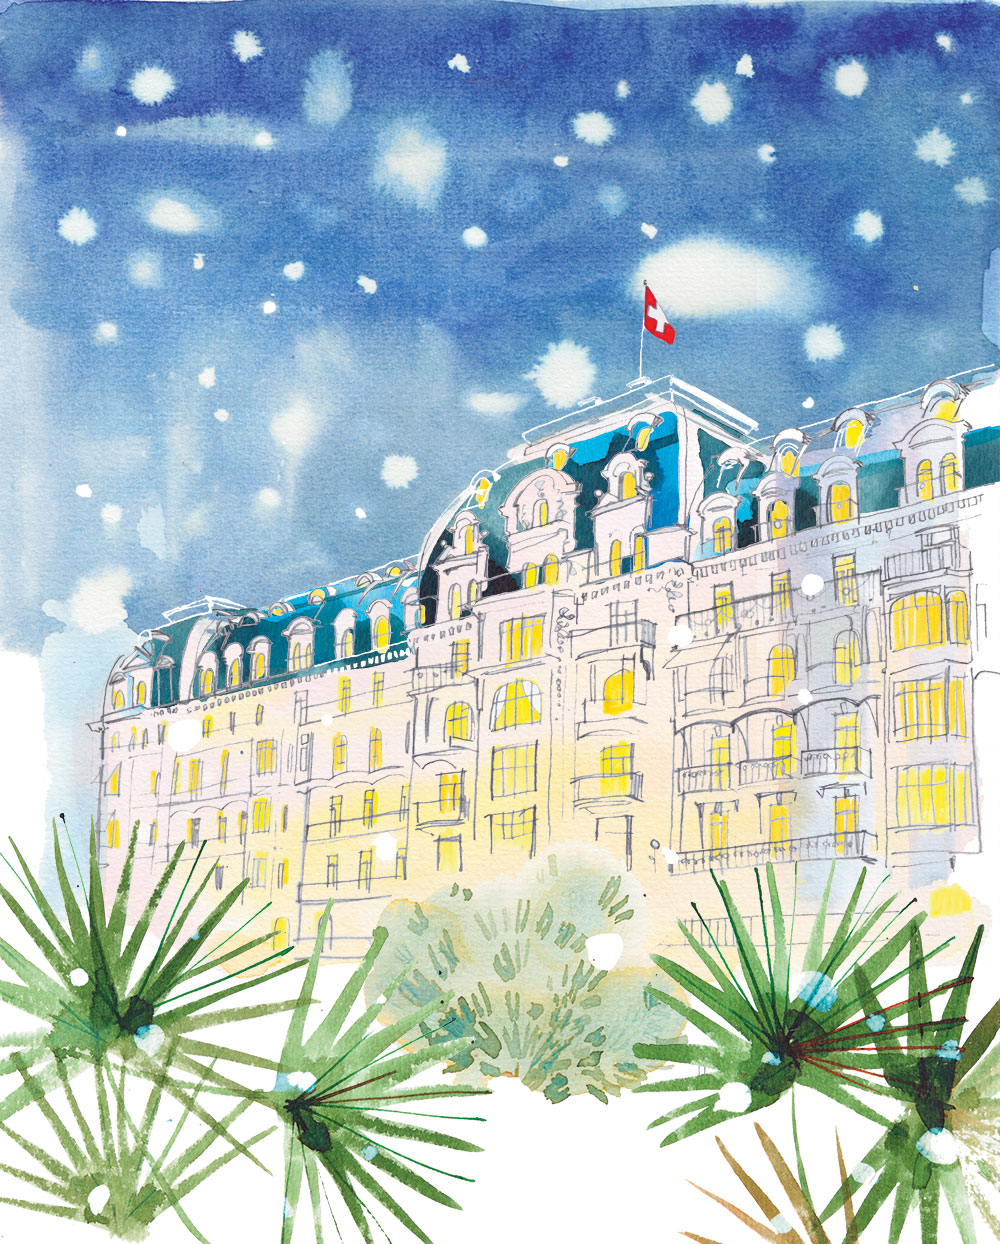 Watercolor illustration of Montreux Palace Hotel in the snow - Montreux Palace Hotel, 2016